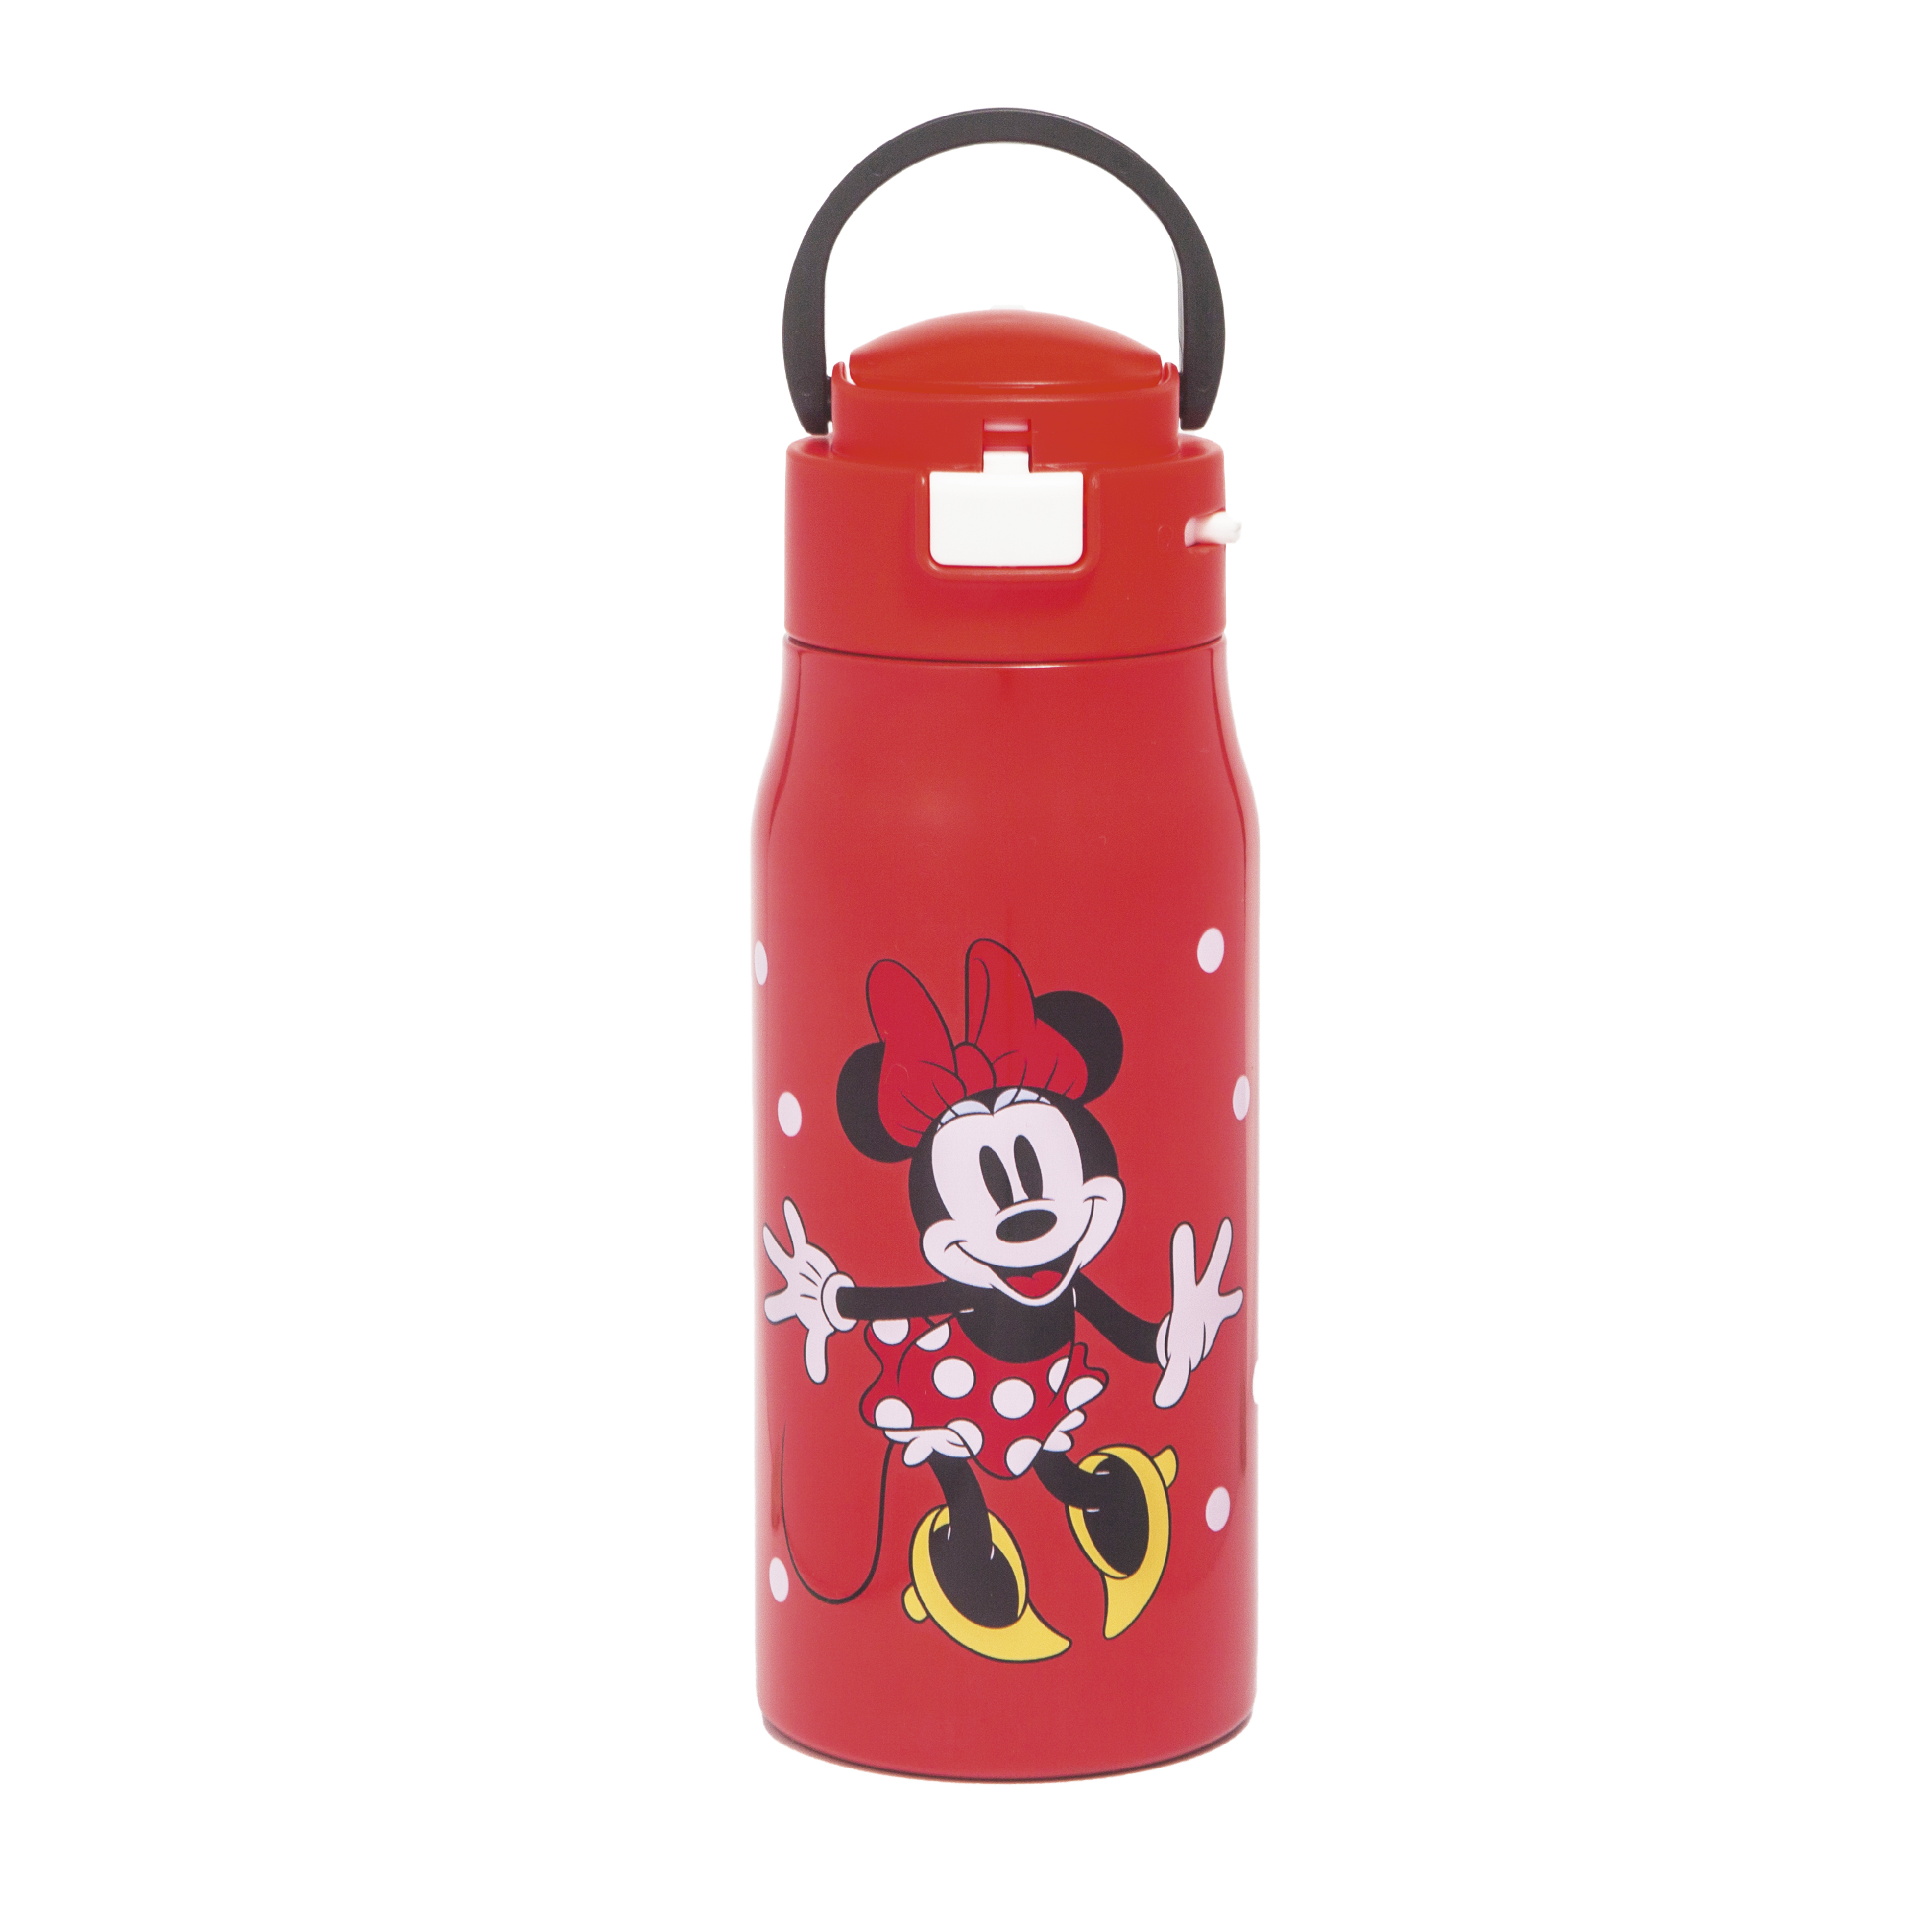 Disney 13.5 ounce Mesa Double Wall Insulated Stainless Steel Water Bottle, Minnie Mouse slideshow image 2